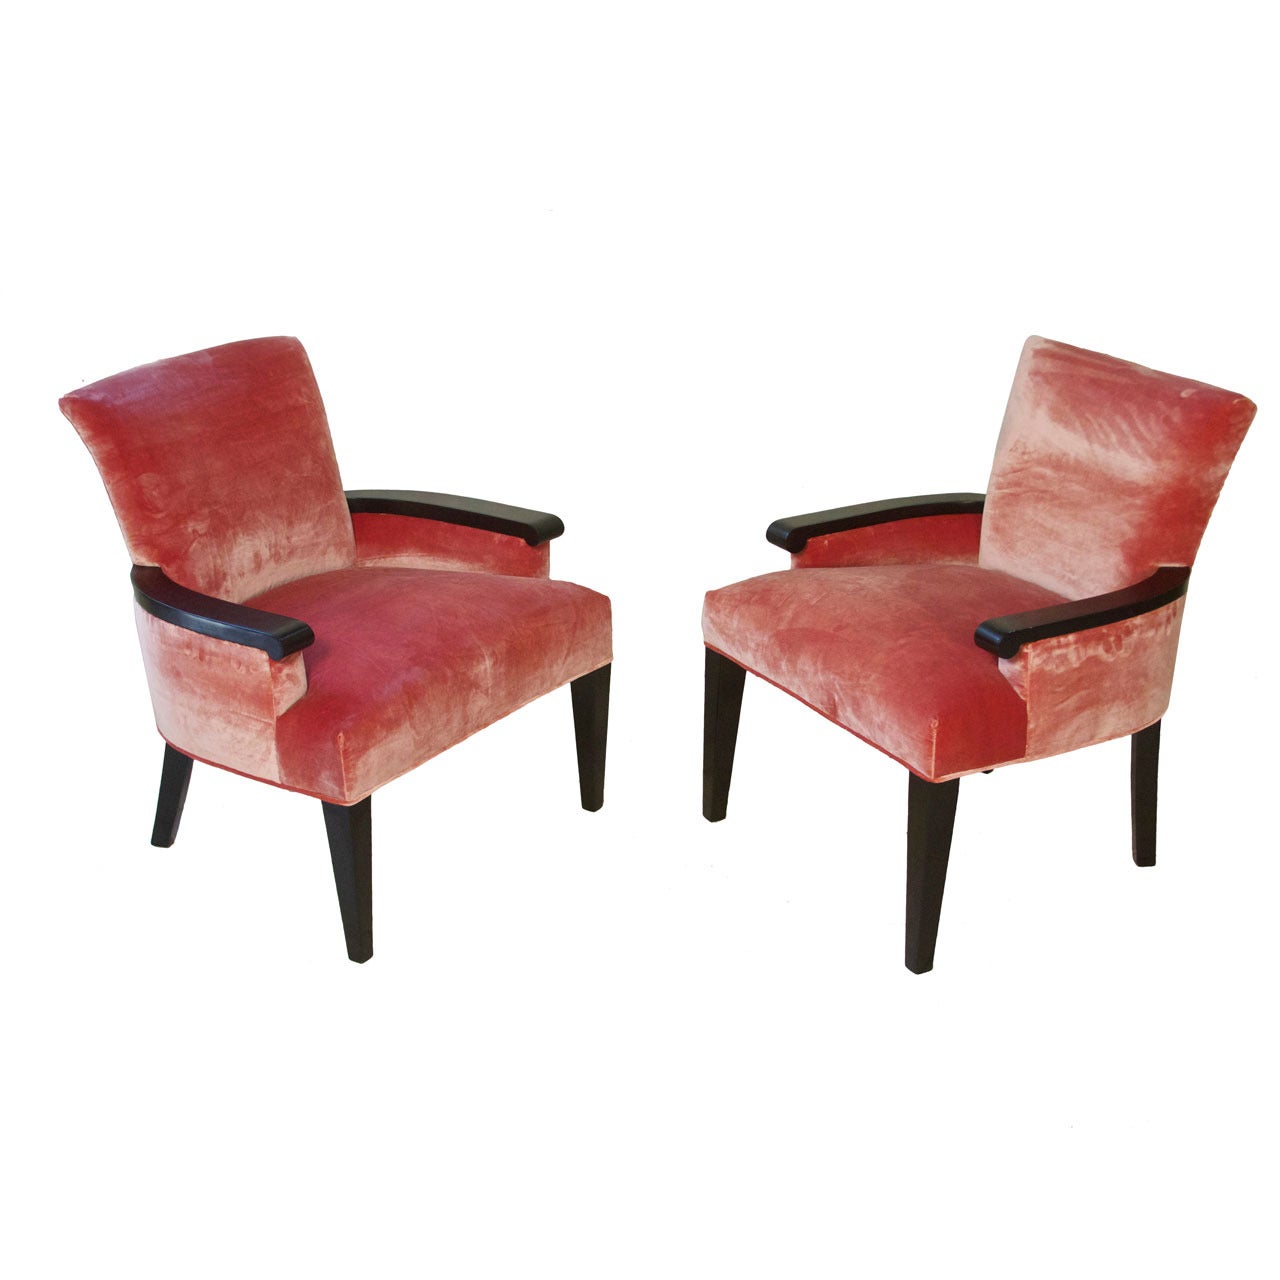 Pair of Armchairs attributed to John Hutton for Donghia